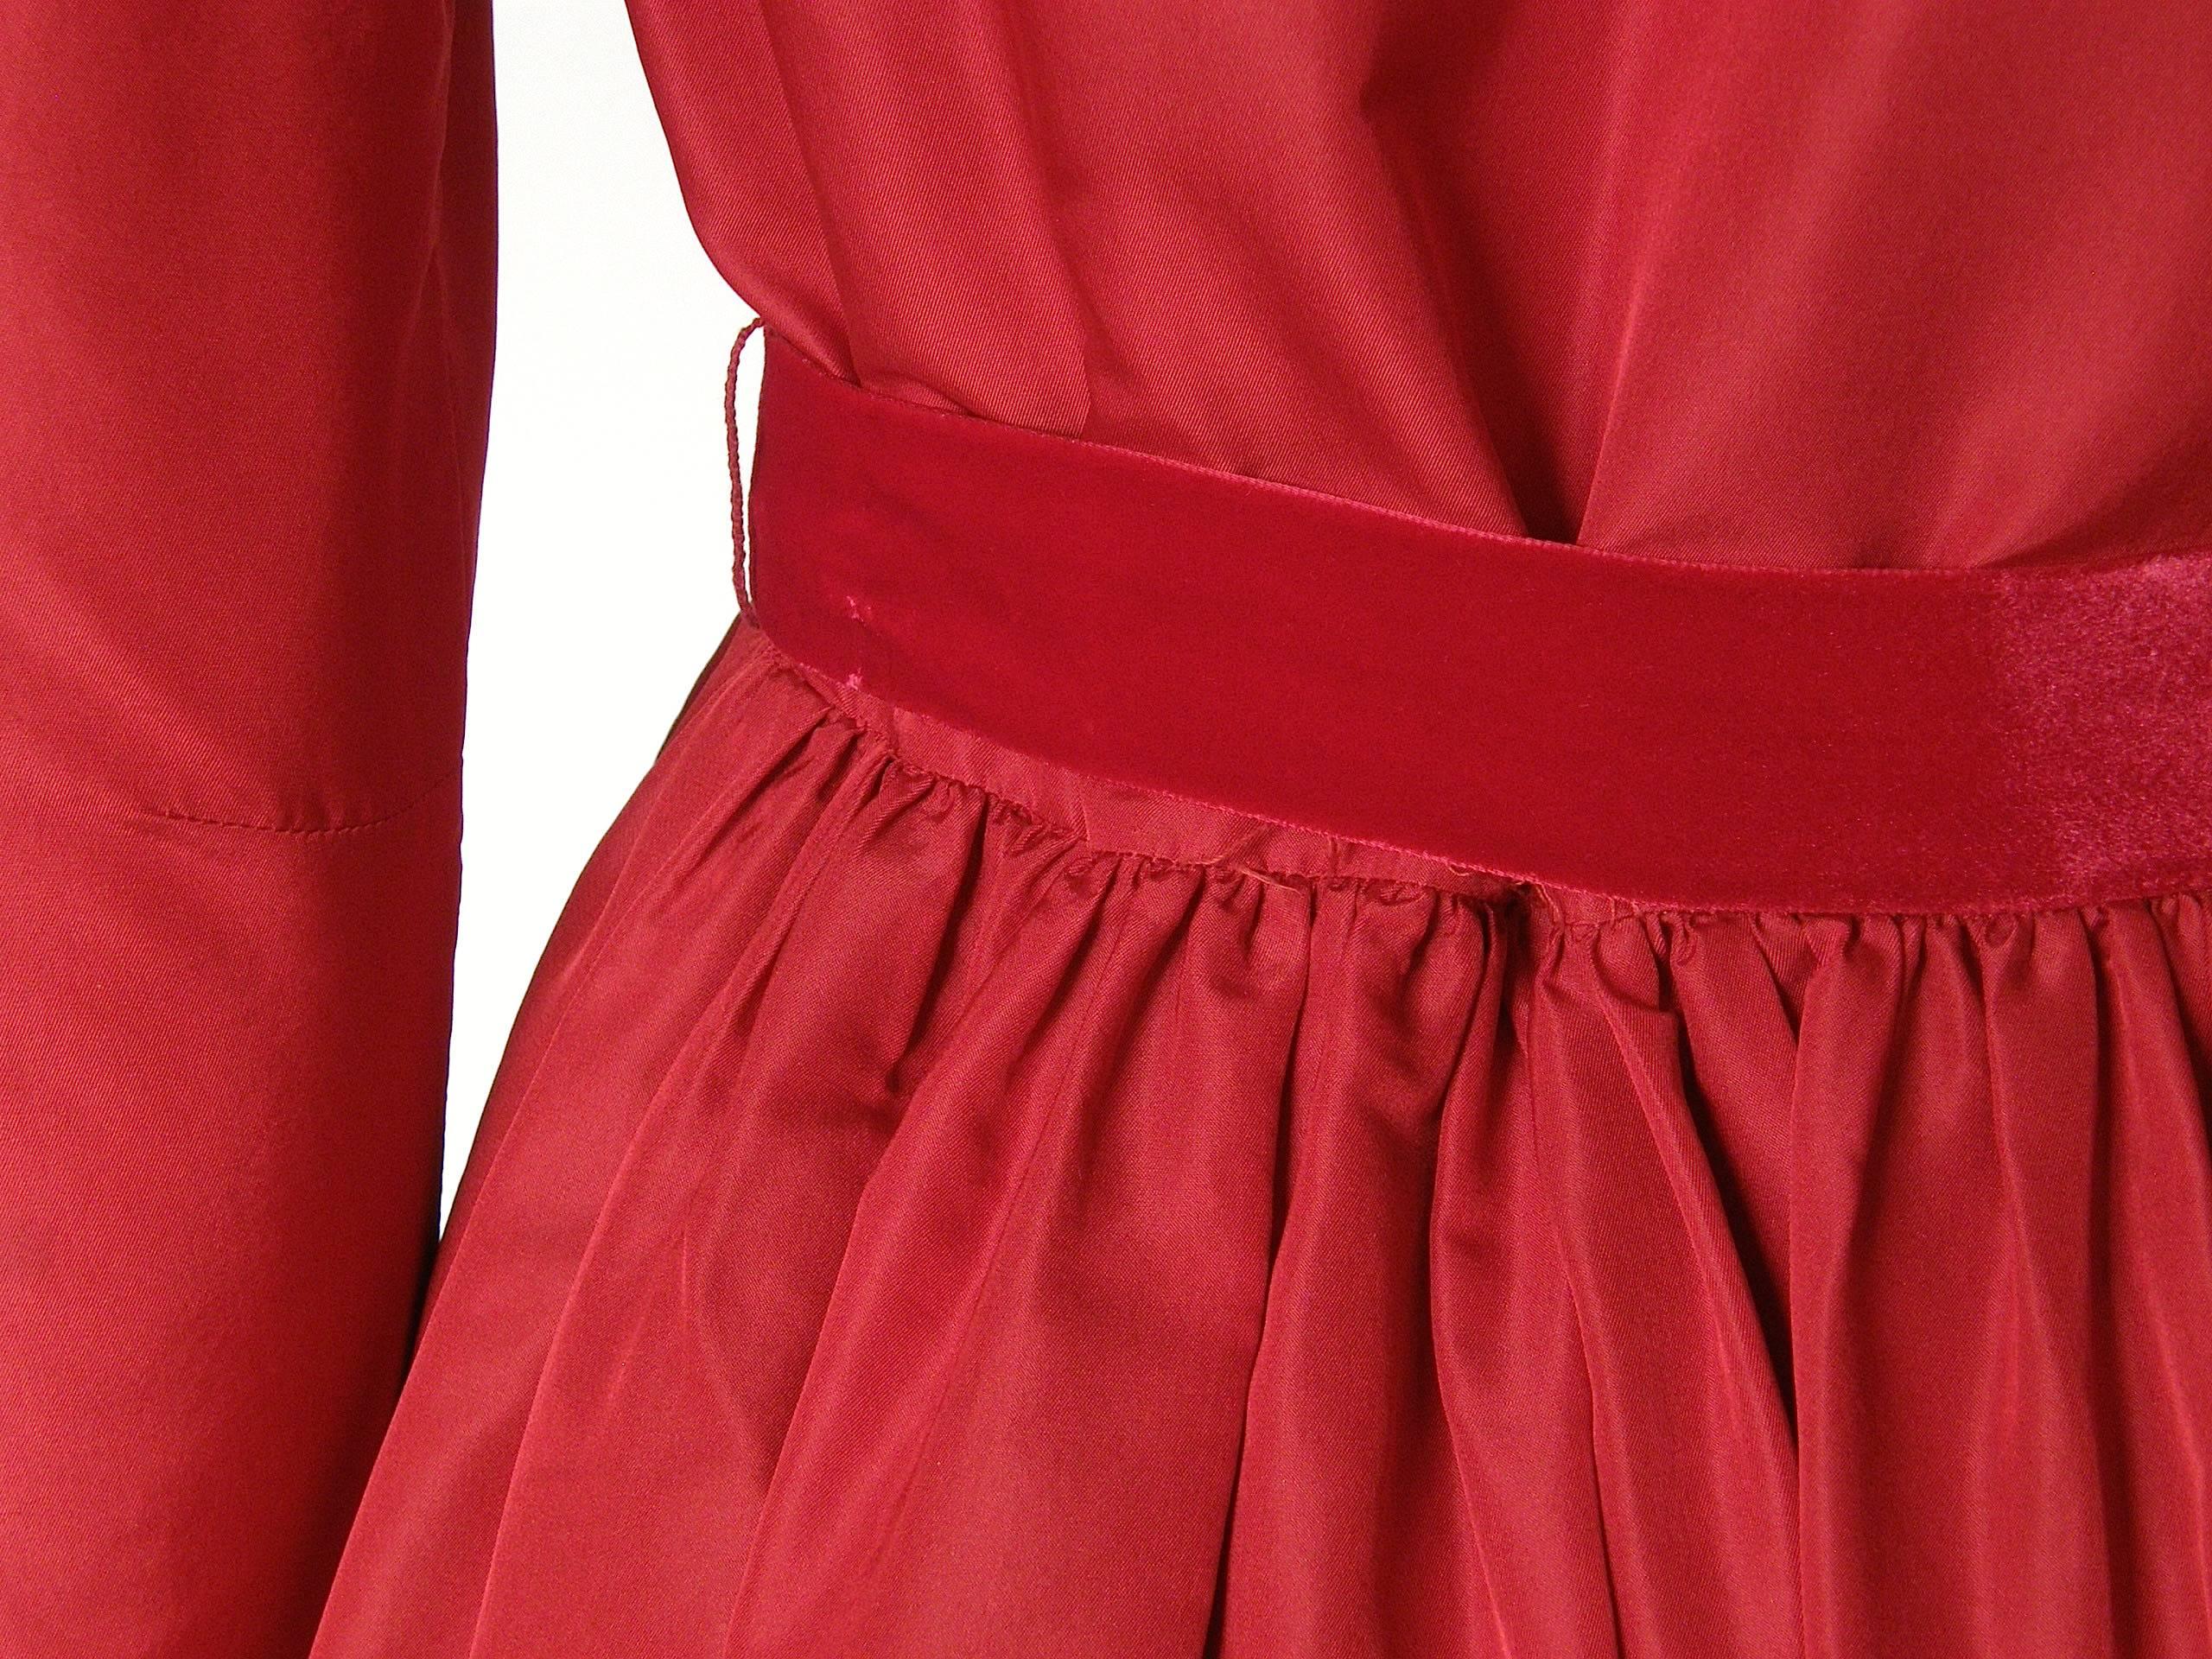 Oscar de la Renta Red Silk Taffeta Gown with Tiered Skirt and Ruffled Cuffs For Sale 1